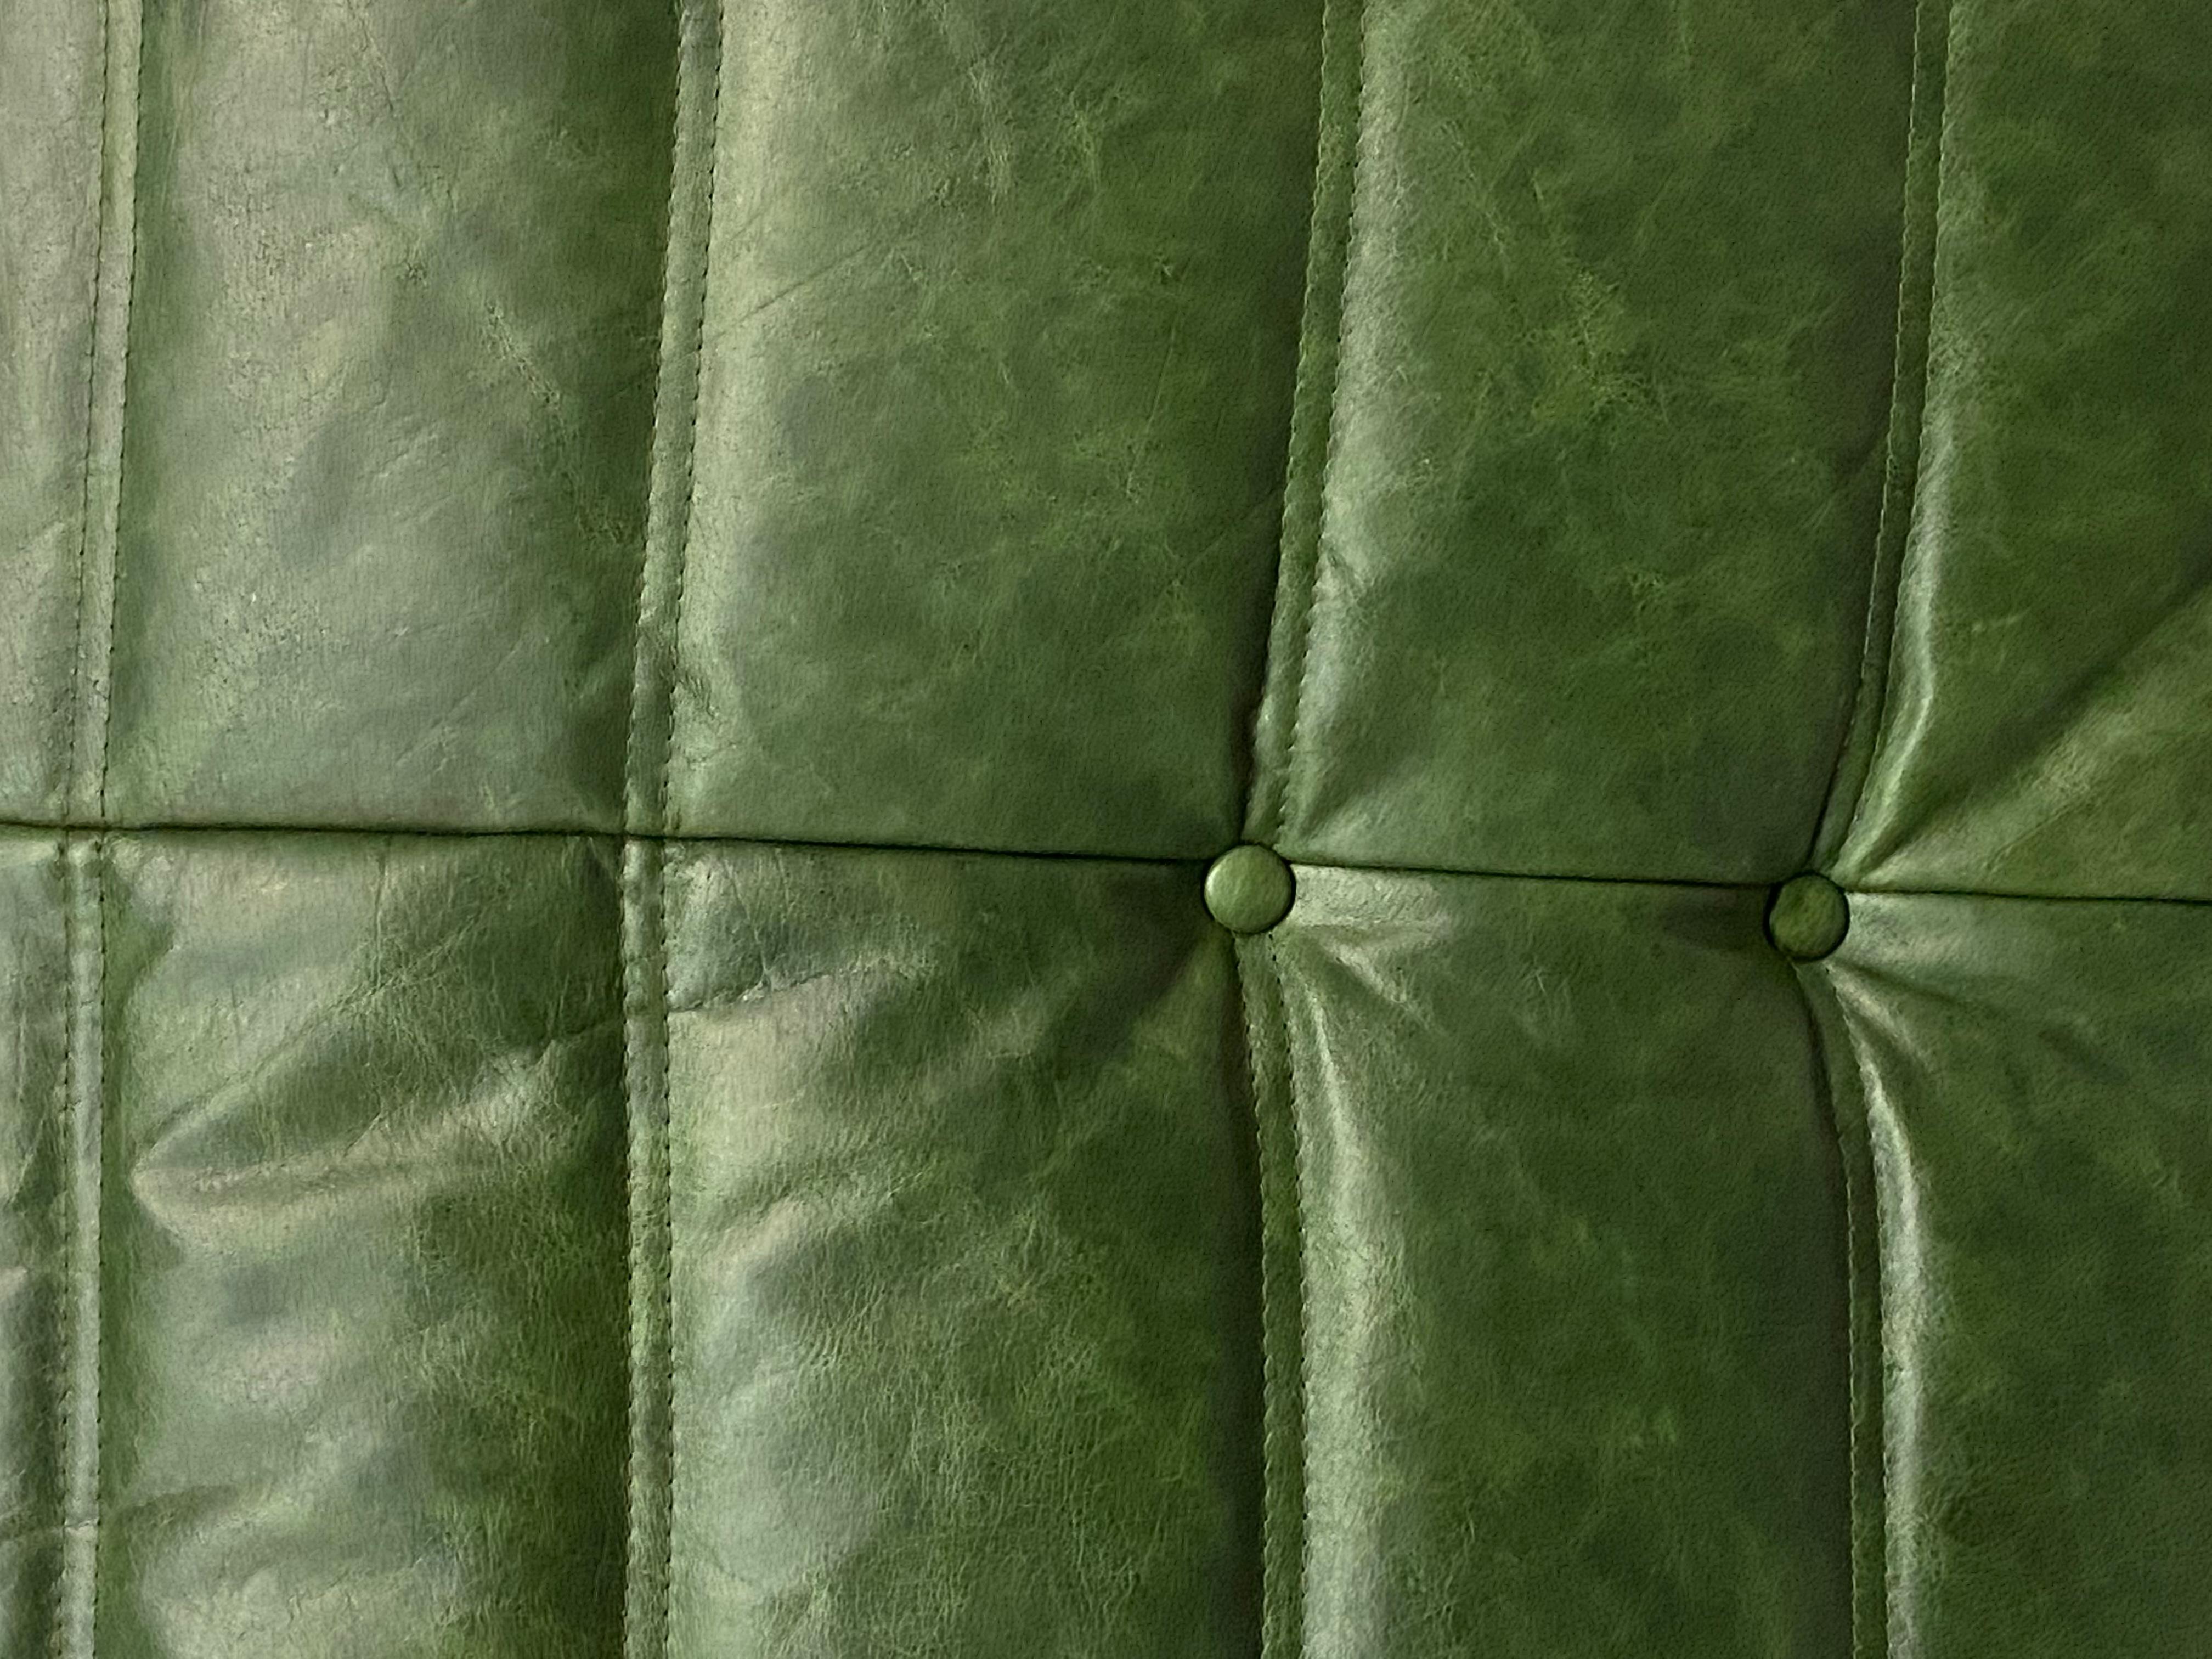 20th Century Vintage French Togo Sofa in Green Leather by Michel Ducaroy for Ligne Roset